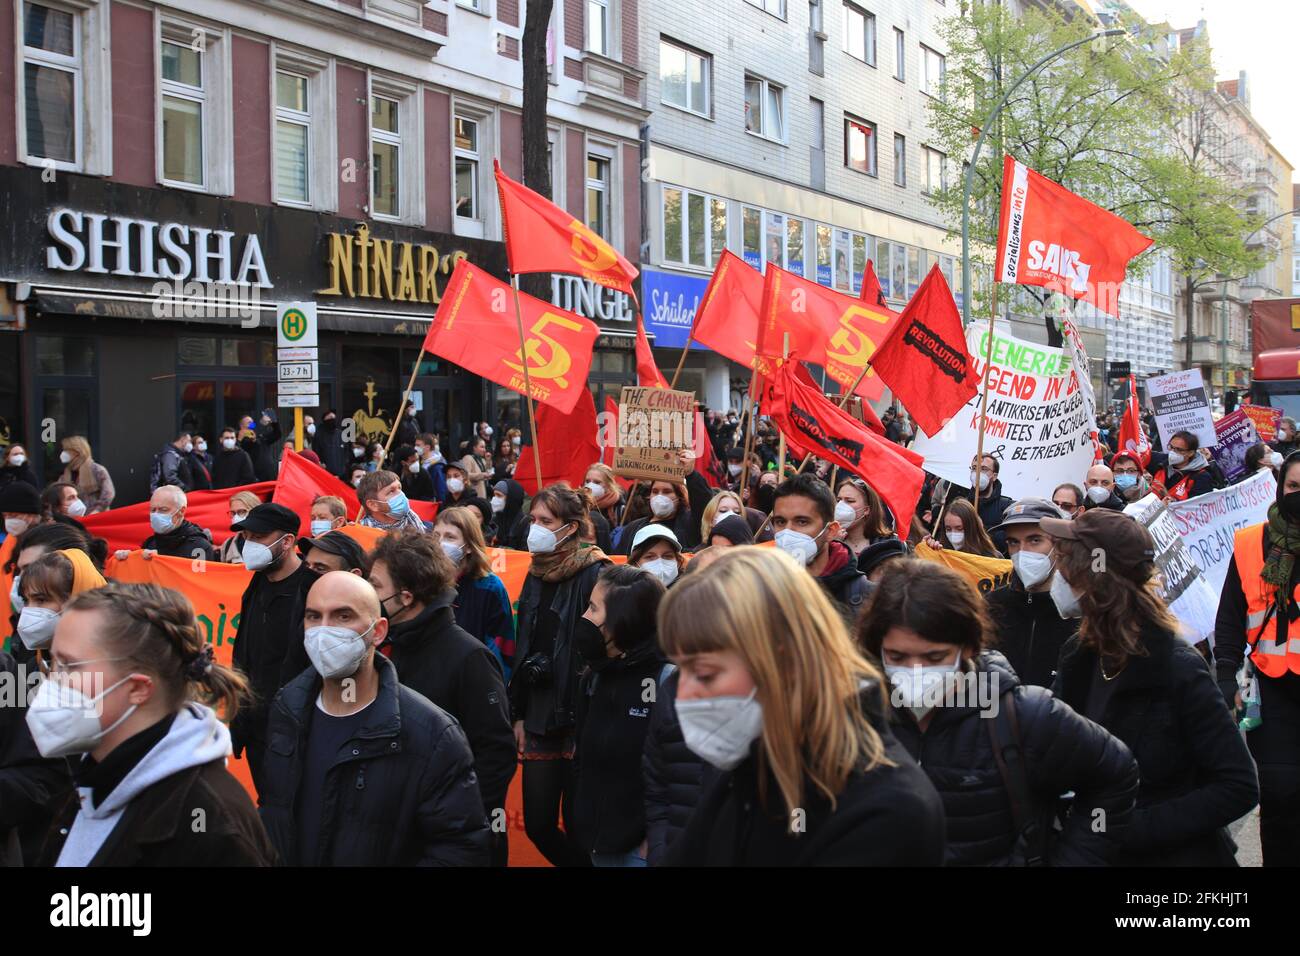 Berlin, Germany - May 01, 2021: Protesters holding a banners and flags at 1st May Demonstrations in Berlin Stock Photo